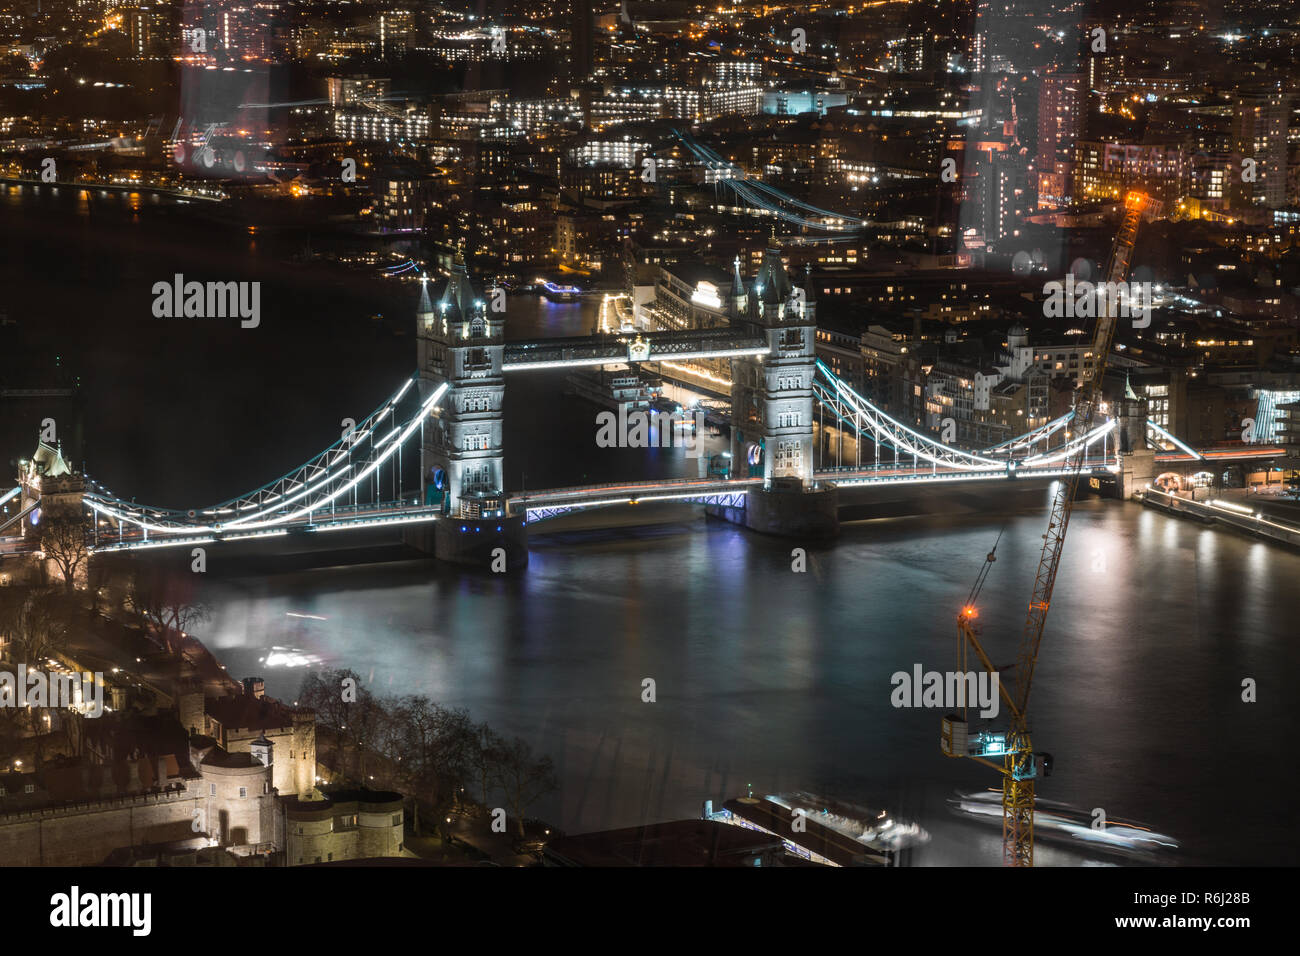 London, England - Tower Bridge and River Thames aerial view with reflections. Stock Photo